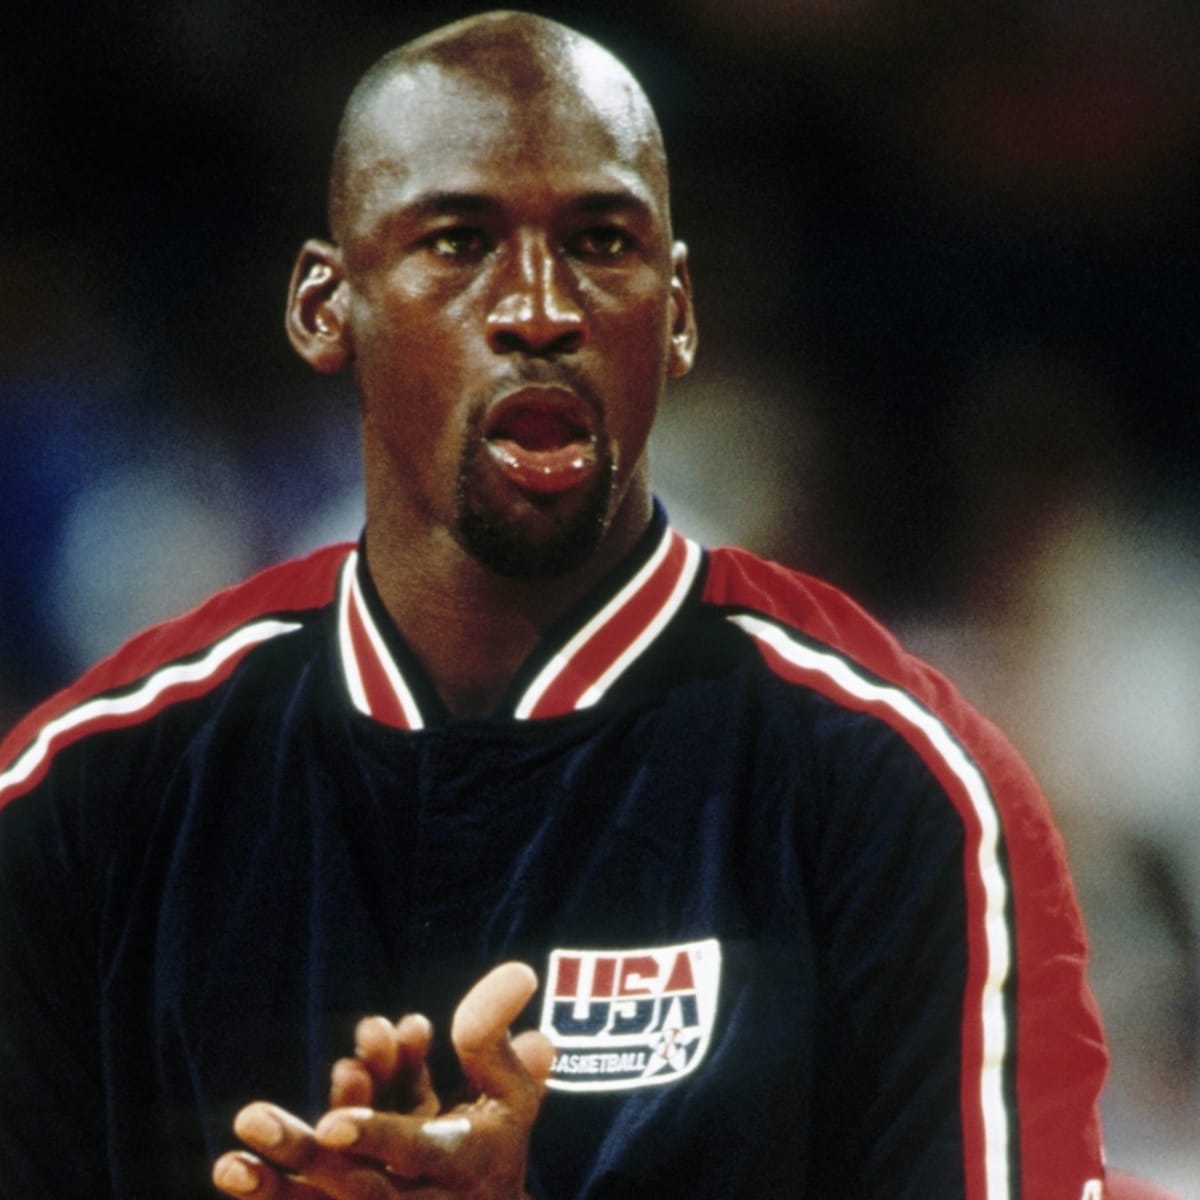 Who's going to beat us? The Japanese? The Chinese?” — Michael Jordan knew  nobody could come close to stopping the Dream Team - Basketball Network -  Your daily dose of basketball